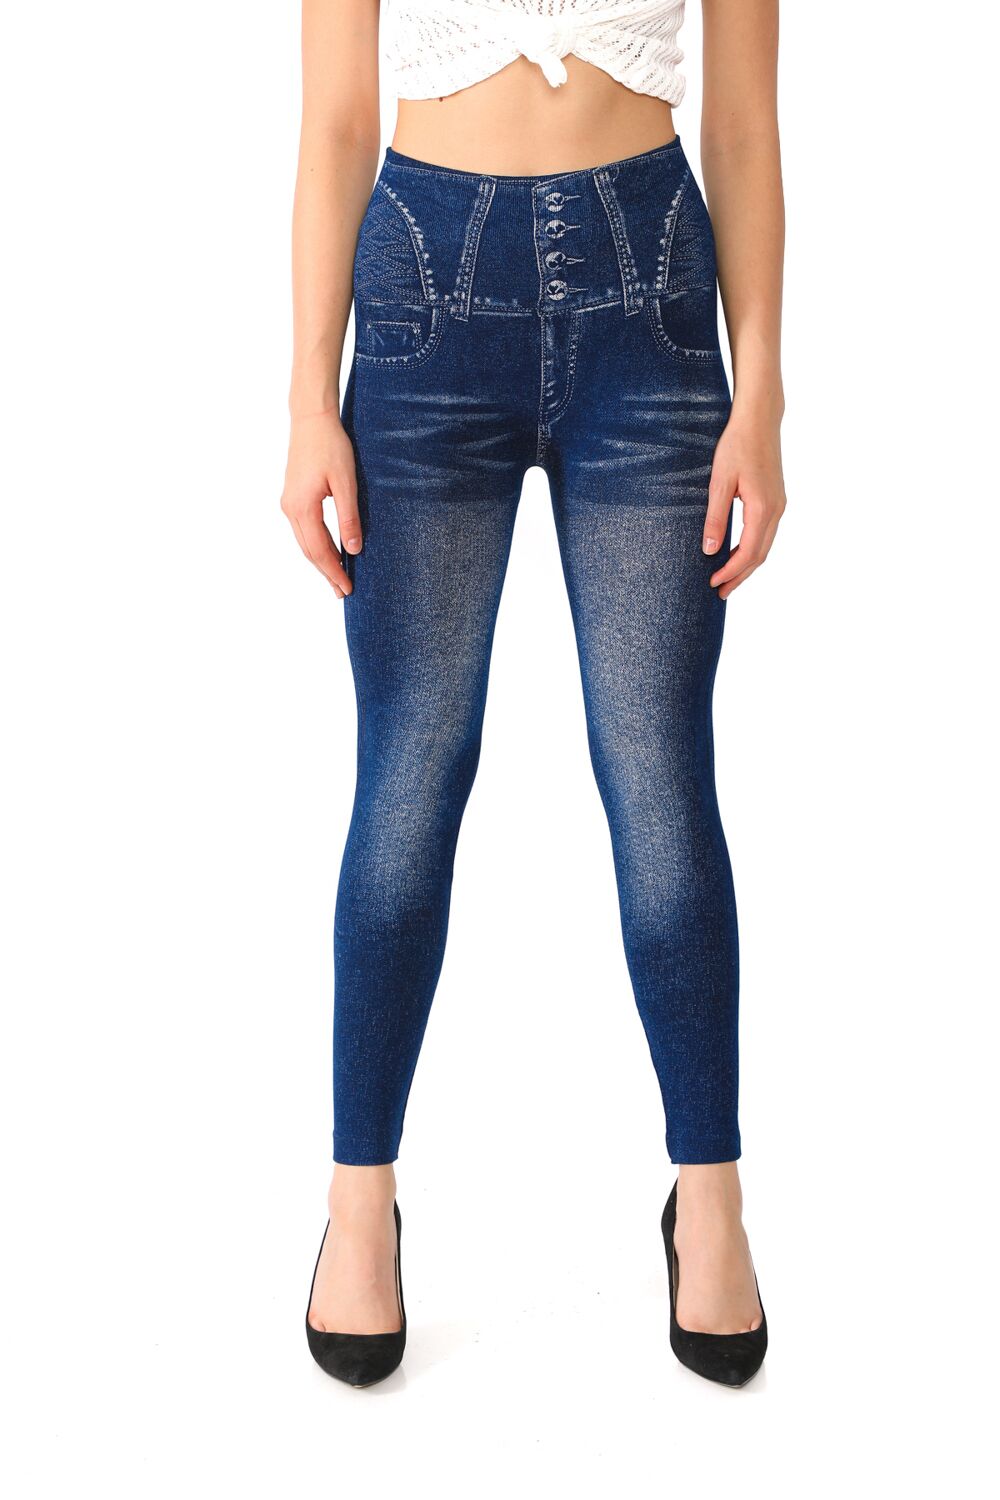 Denim Leggings with Fake Pockets and Button Pattern - 1